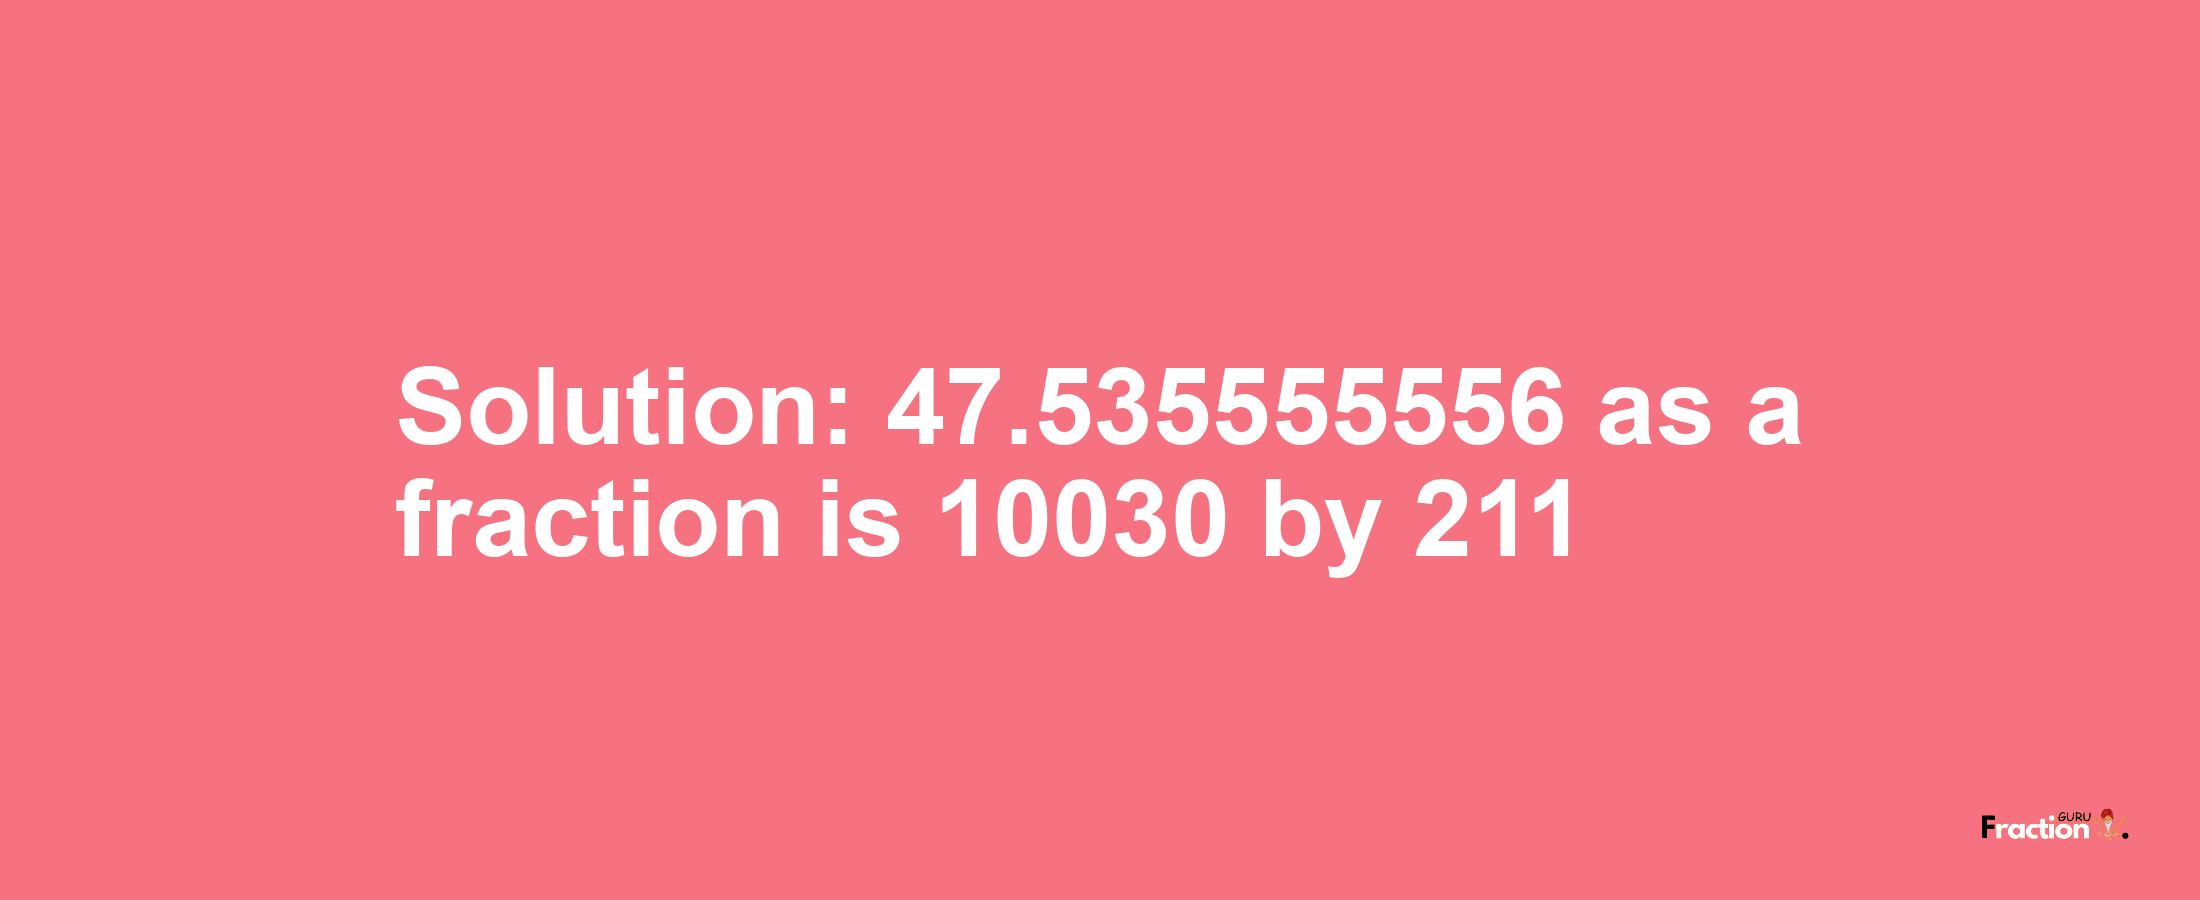 Solution:47.535555556 as a fraction is 10030/211